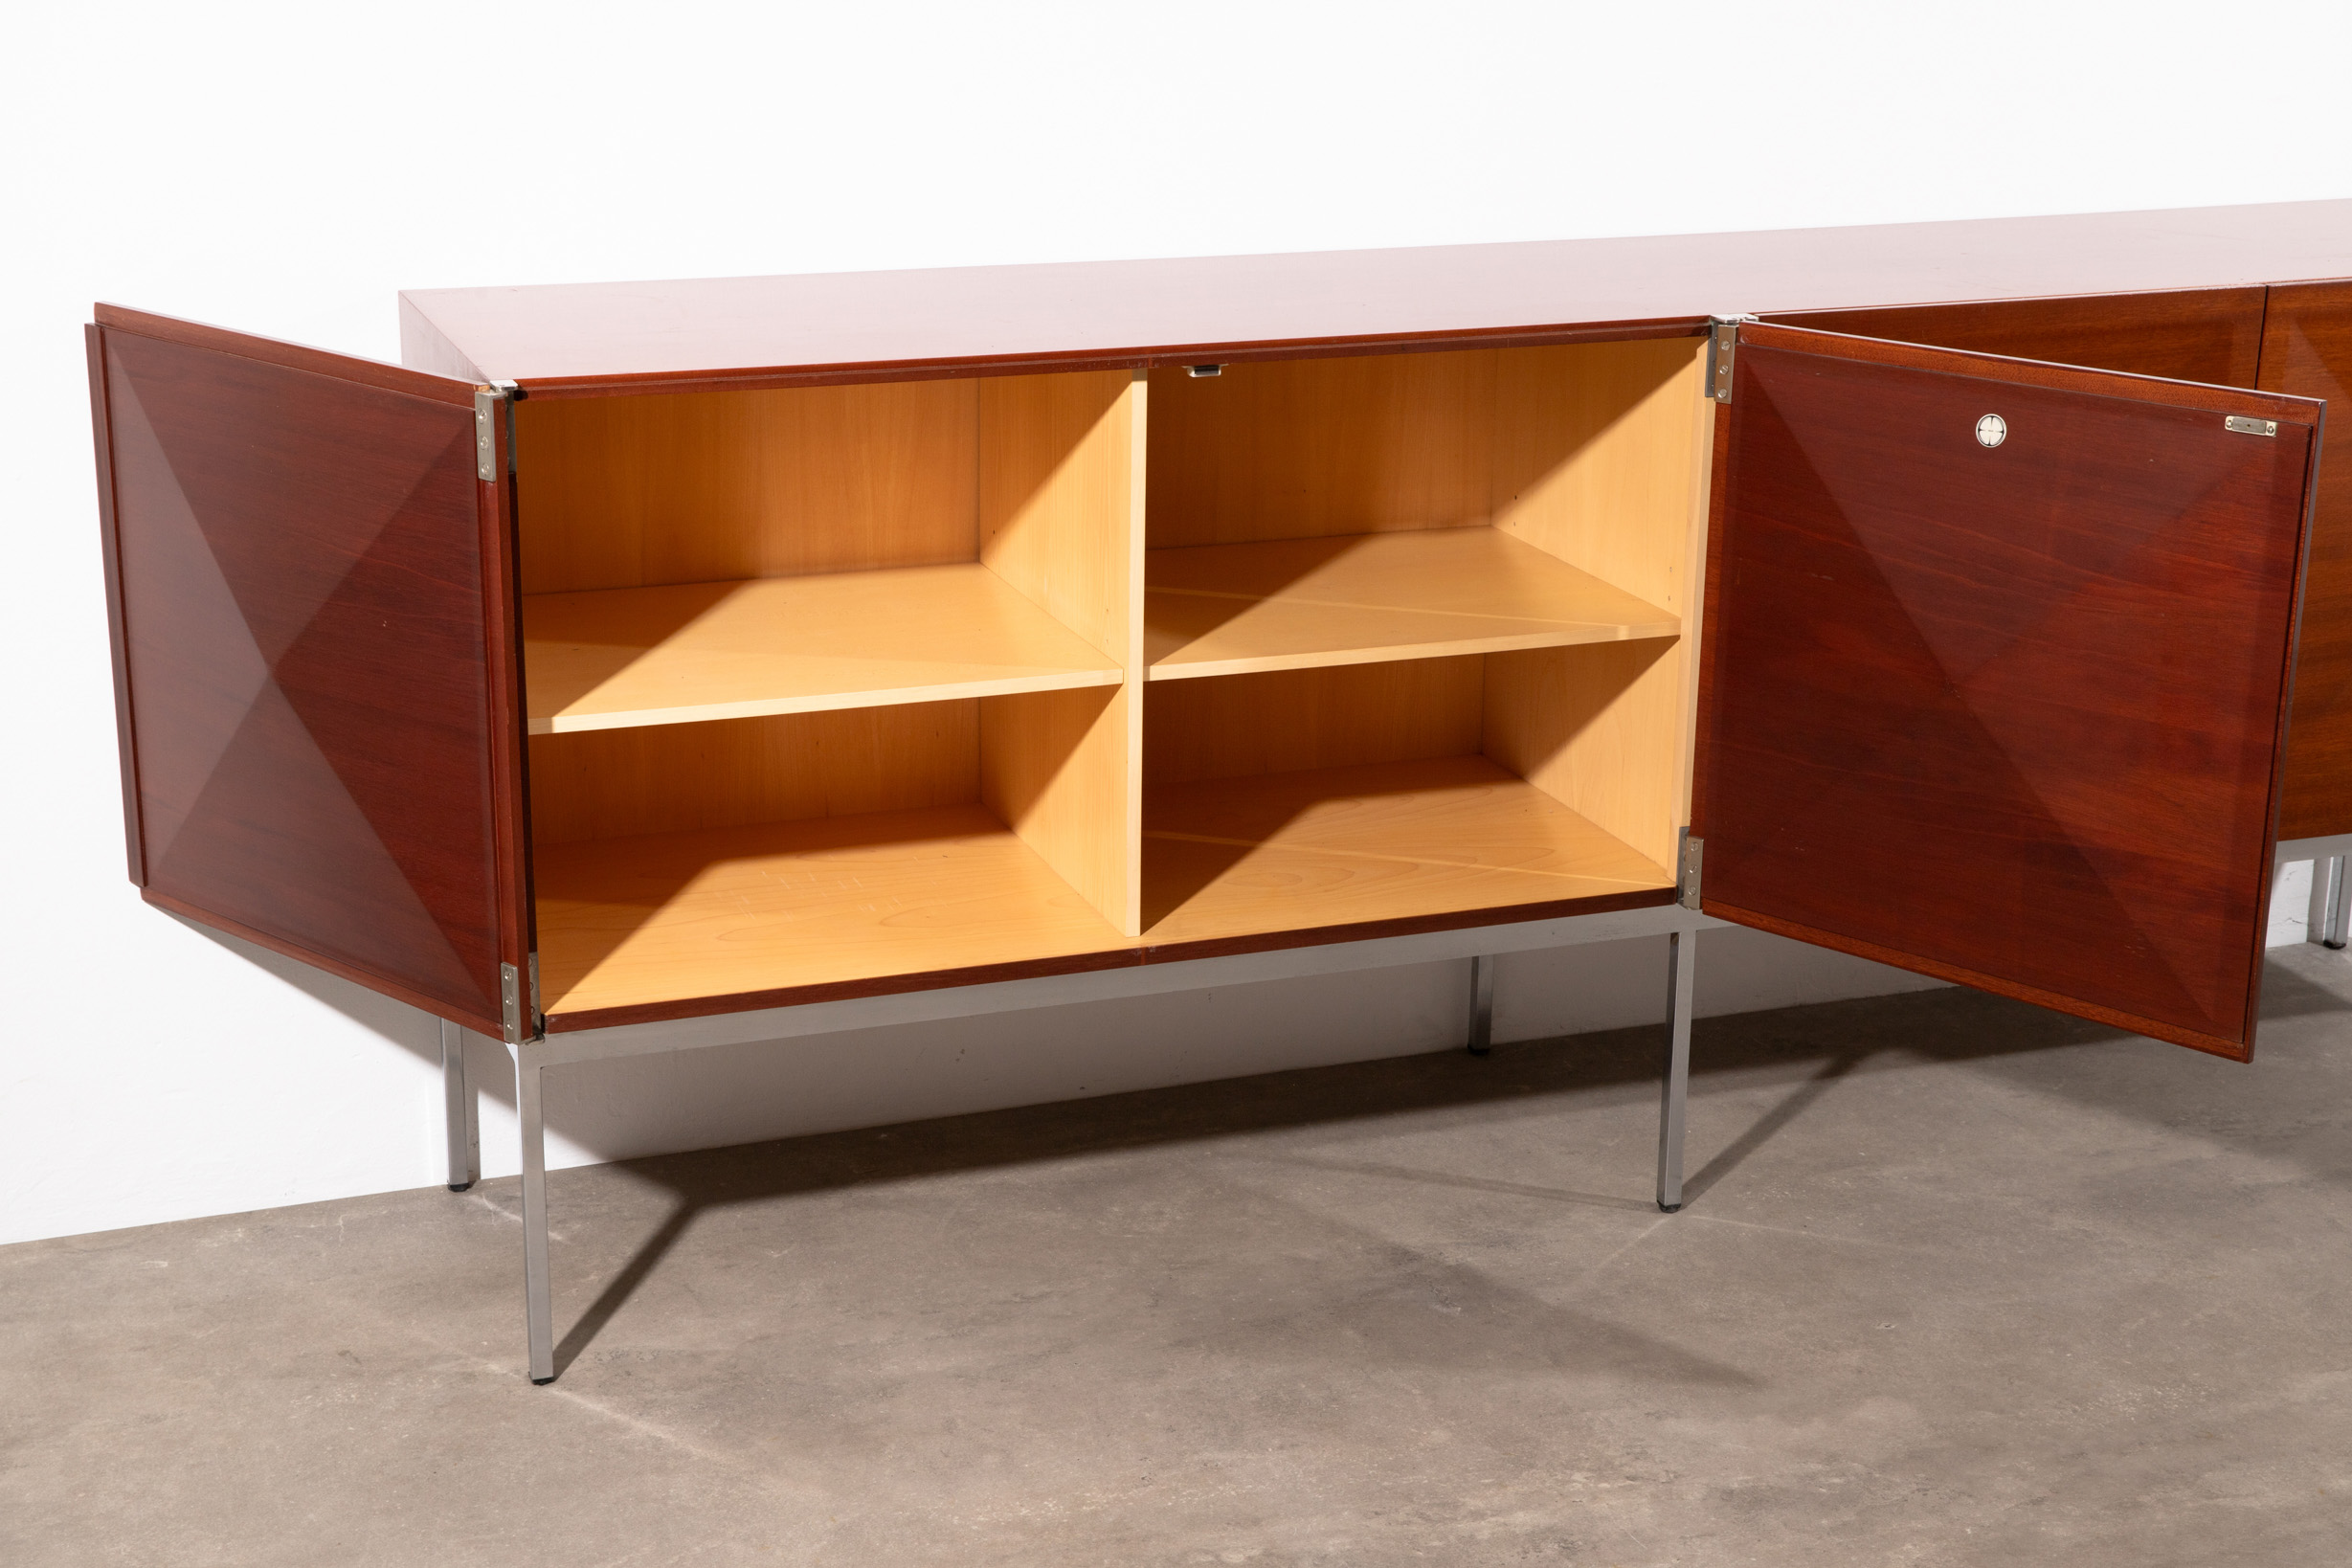 Philippon & Lecoq, Behr, Sideboard from the Diamond series - Image 4 of 7